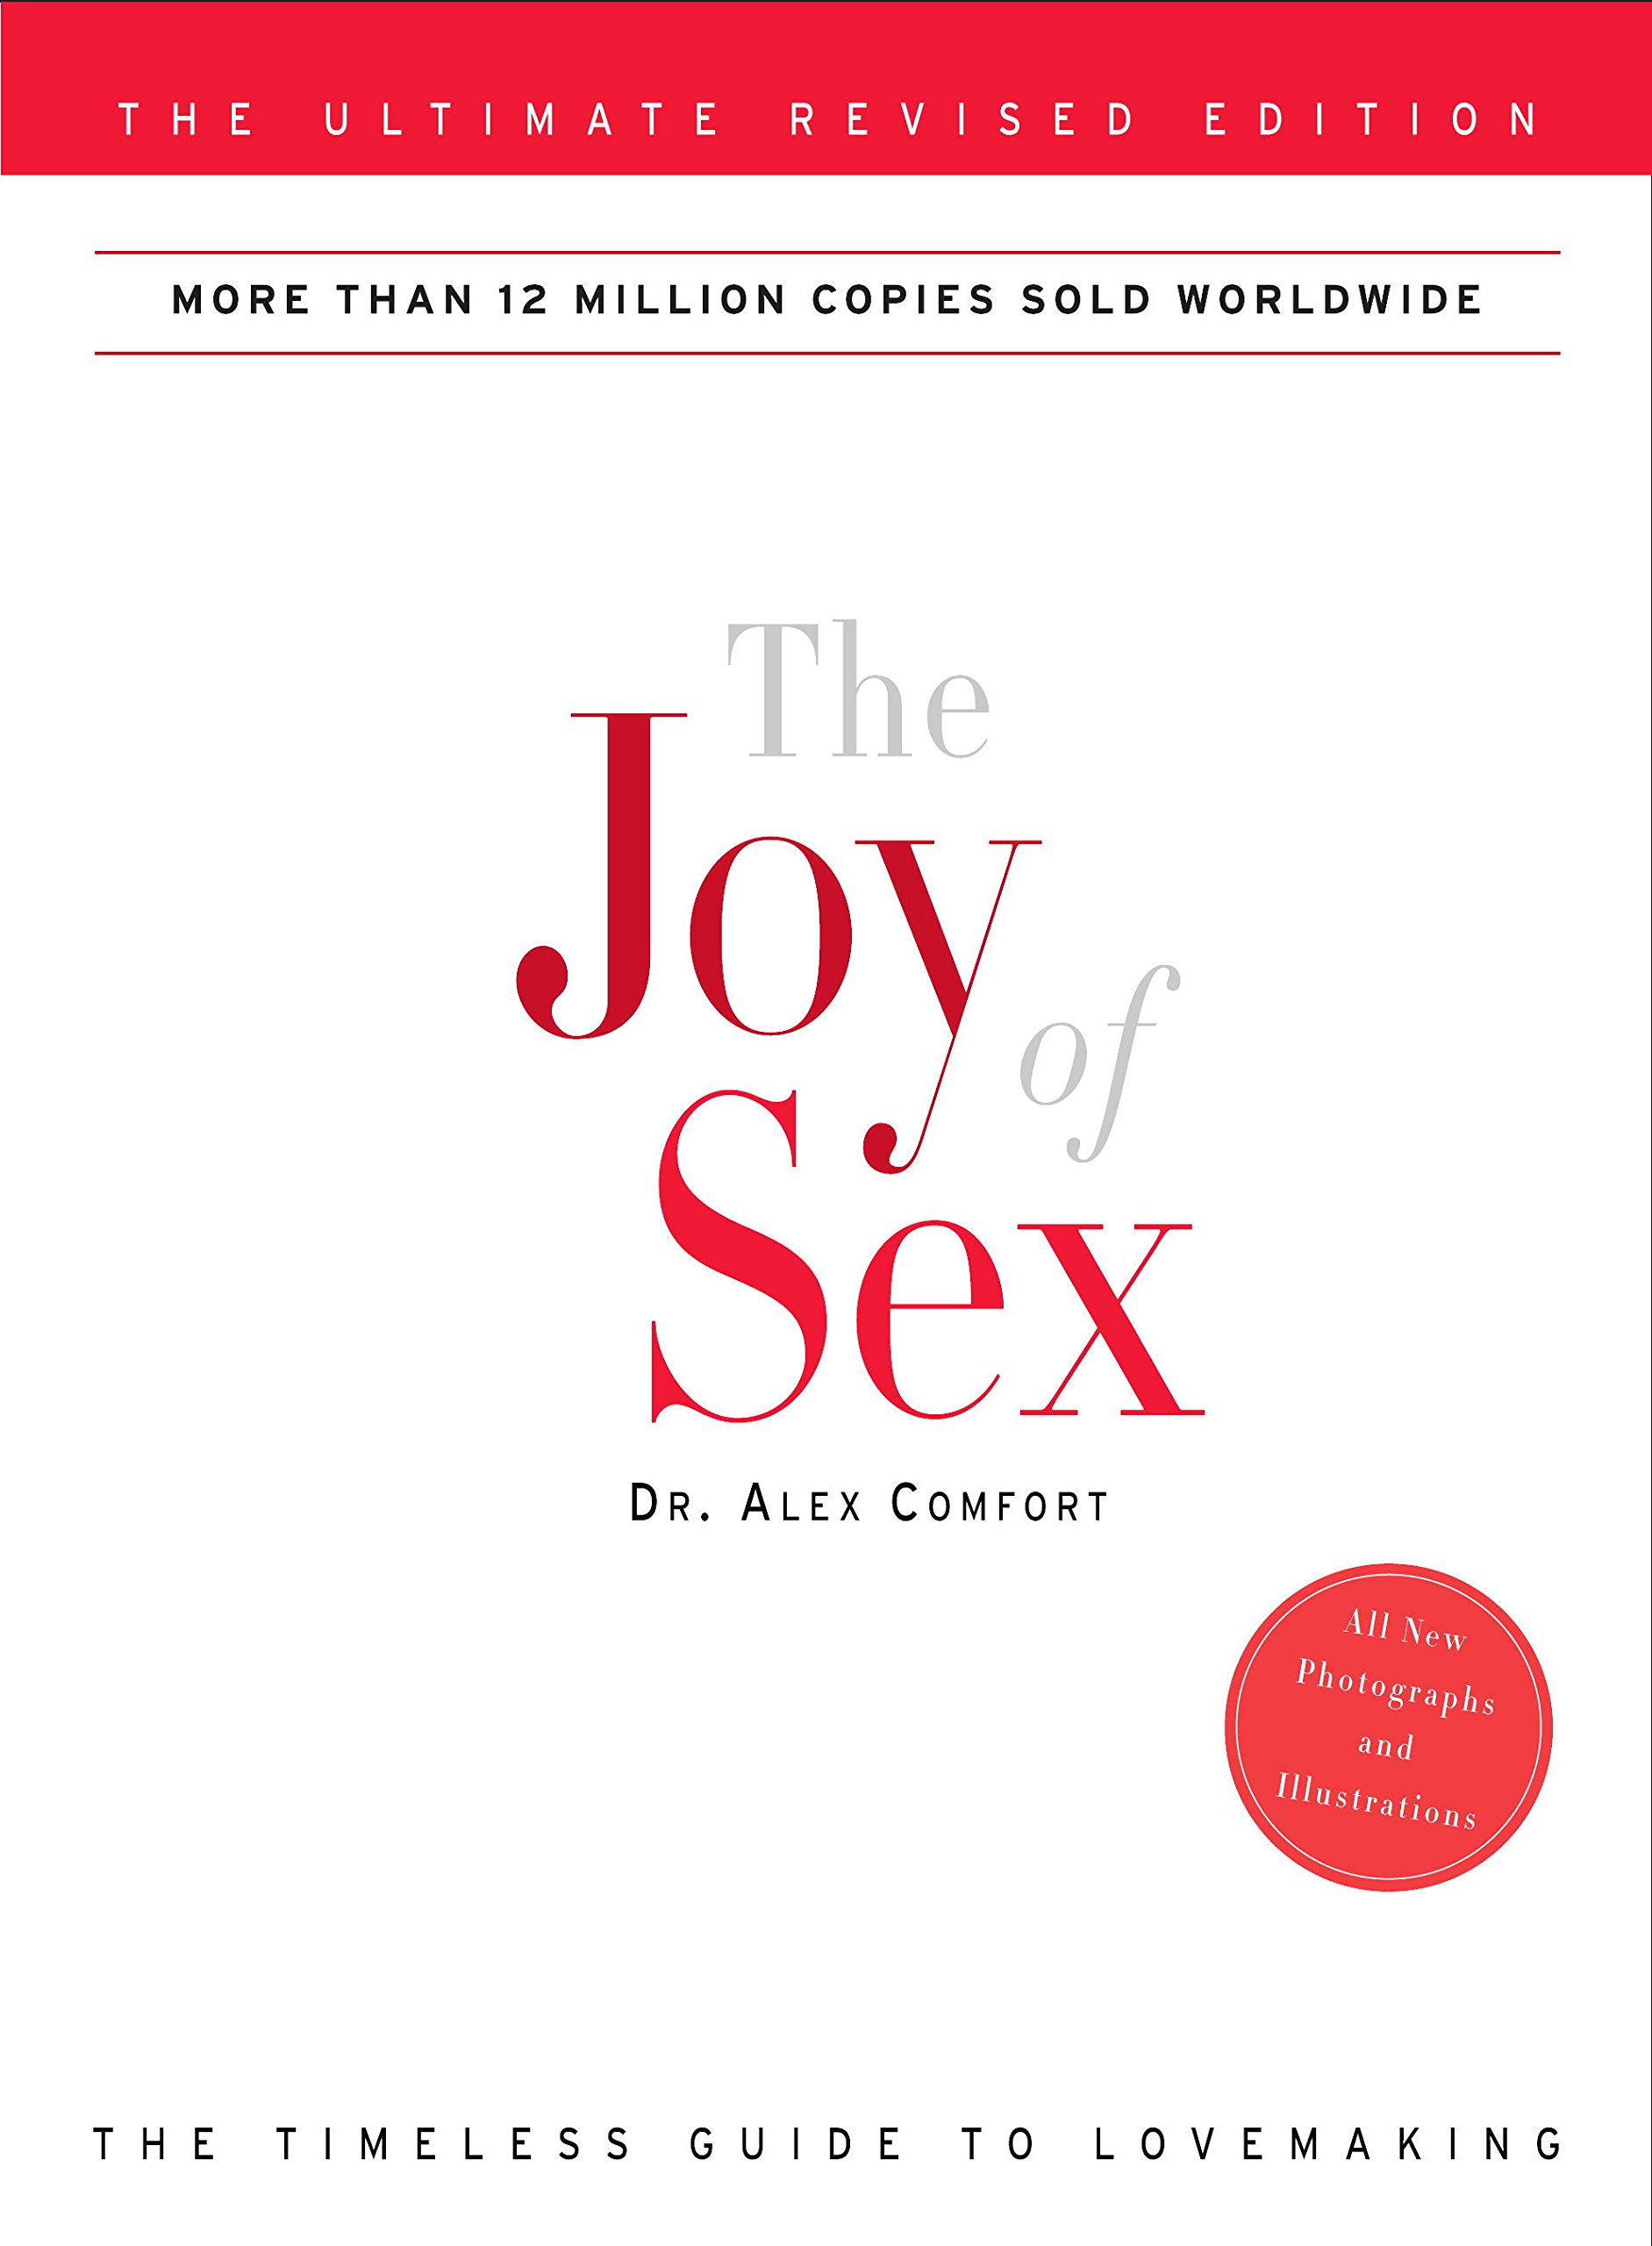 The Joy of Sex: The Ultimate Revised Edition (eBook) by Alex Comfort $1.99